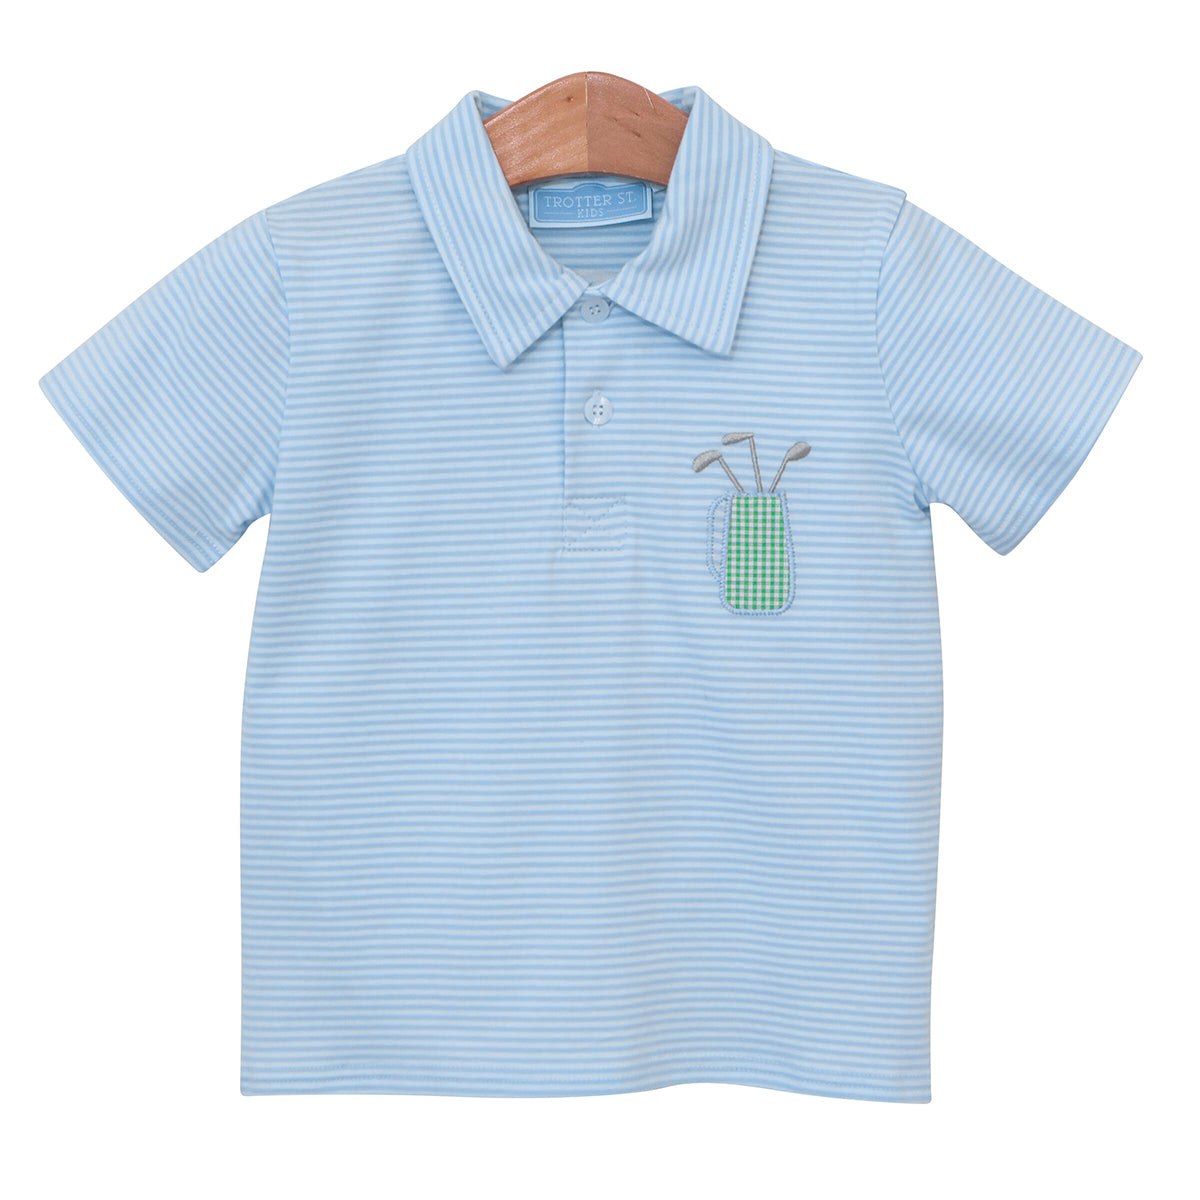 Toddler Boy's Golf Applique Knit Polo Shirt by Trotter Street Kids